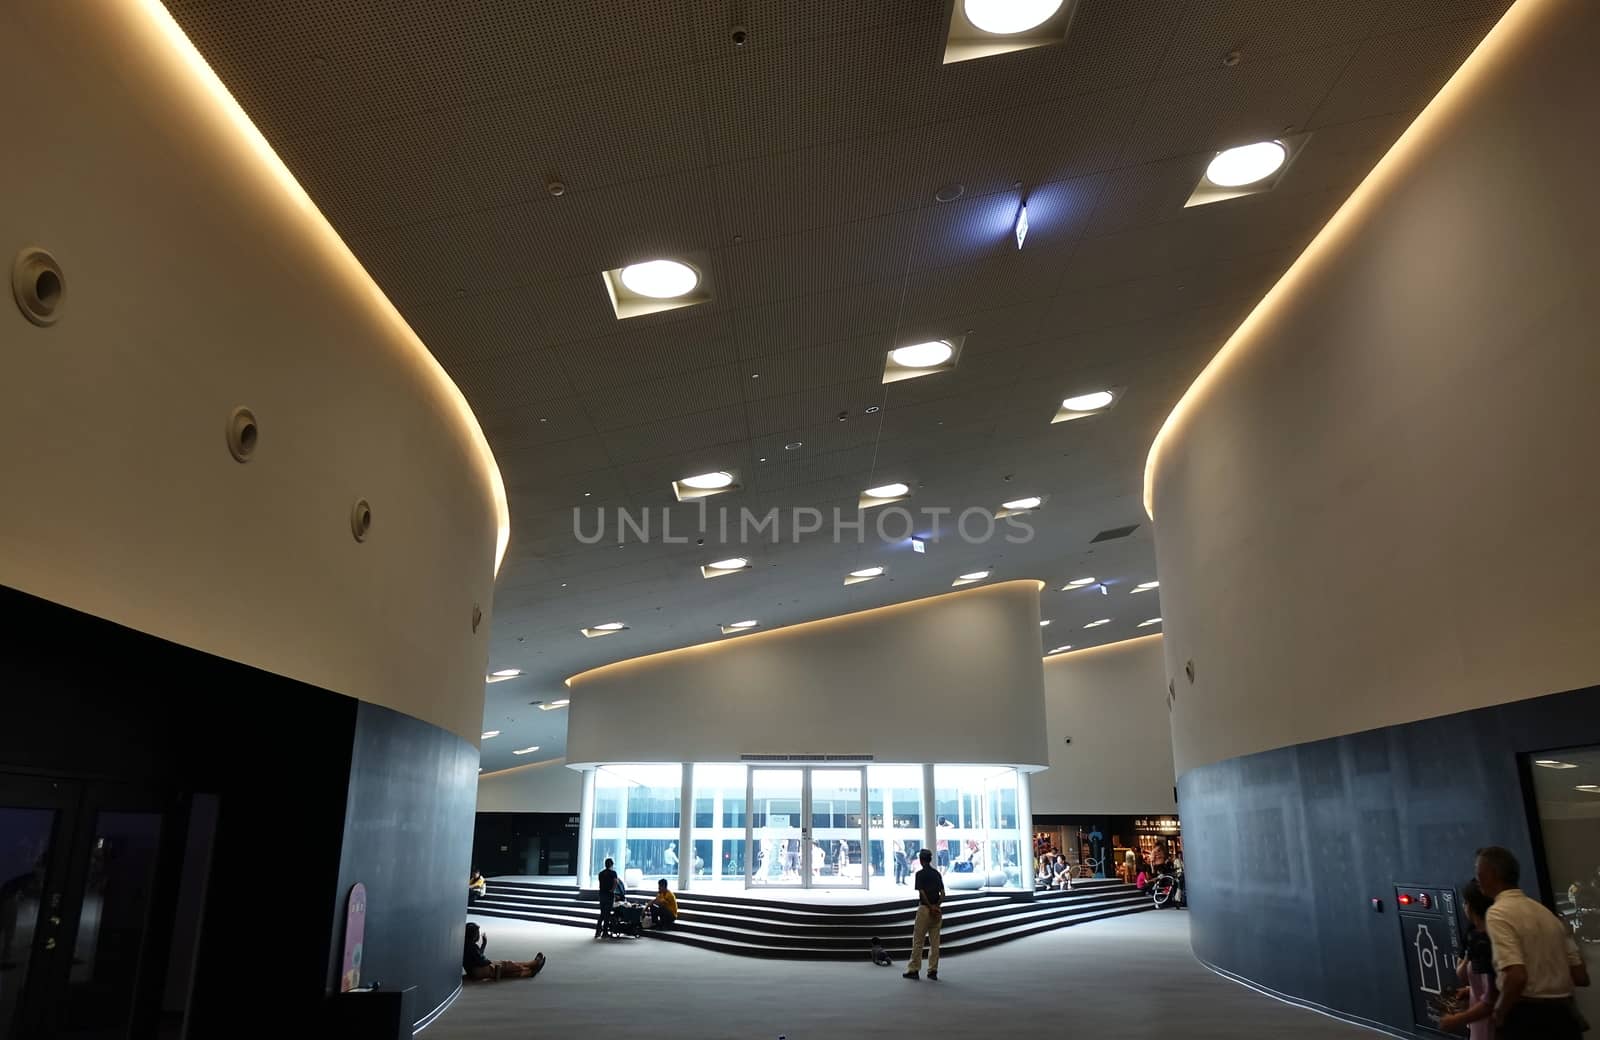 KAOHSIUNG, TAIWAN -- APRIL 14, 2019: The interior public areas of the recently completed National Center for the Performing Arts located in the Weiwuying Metropolitan Park